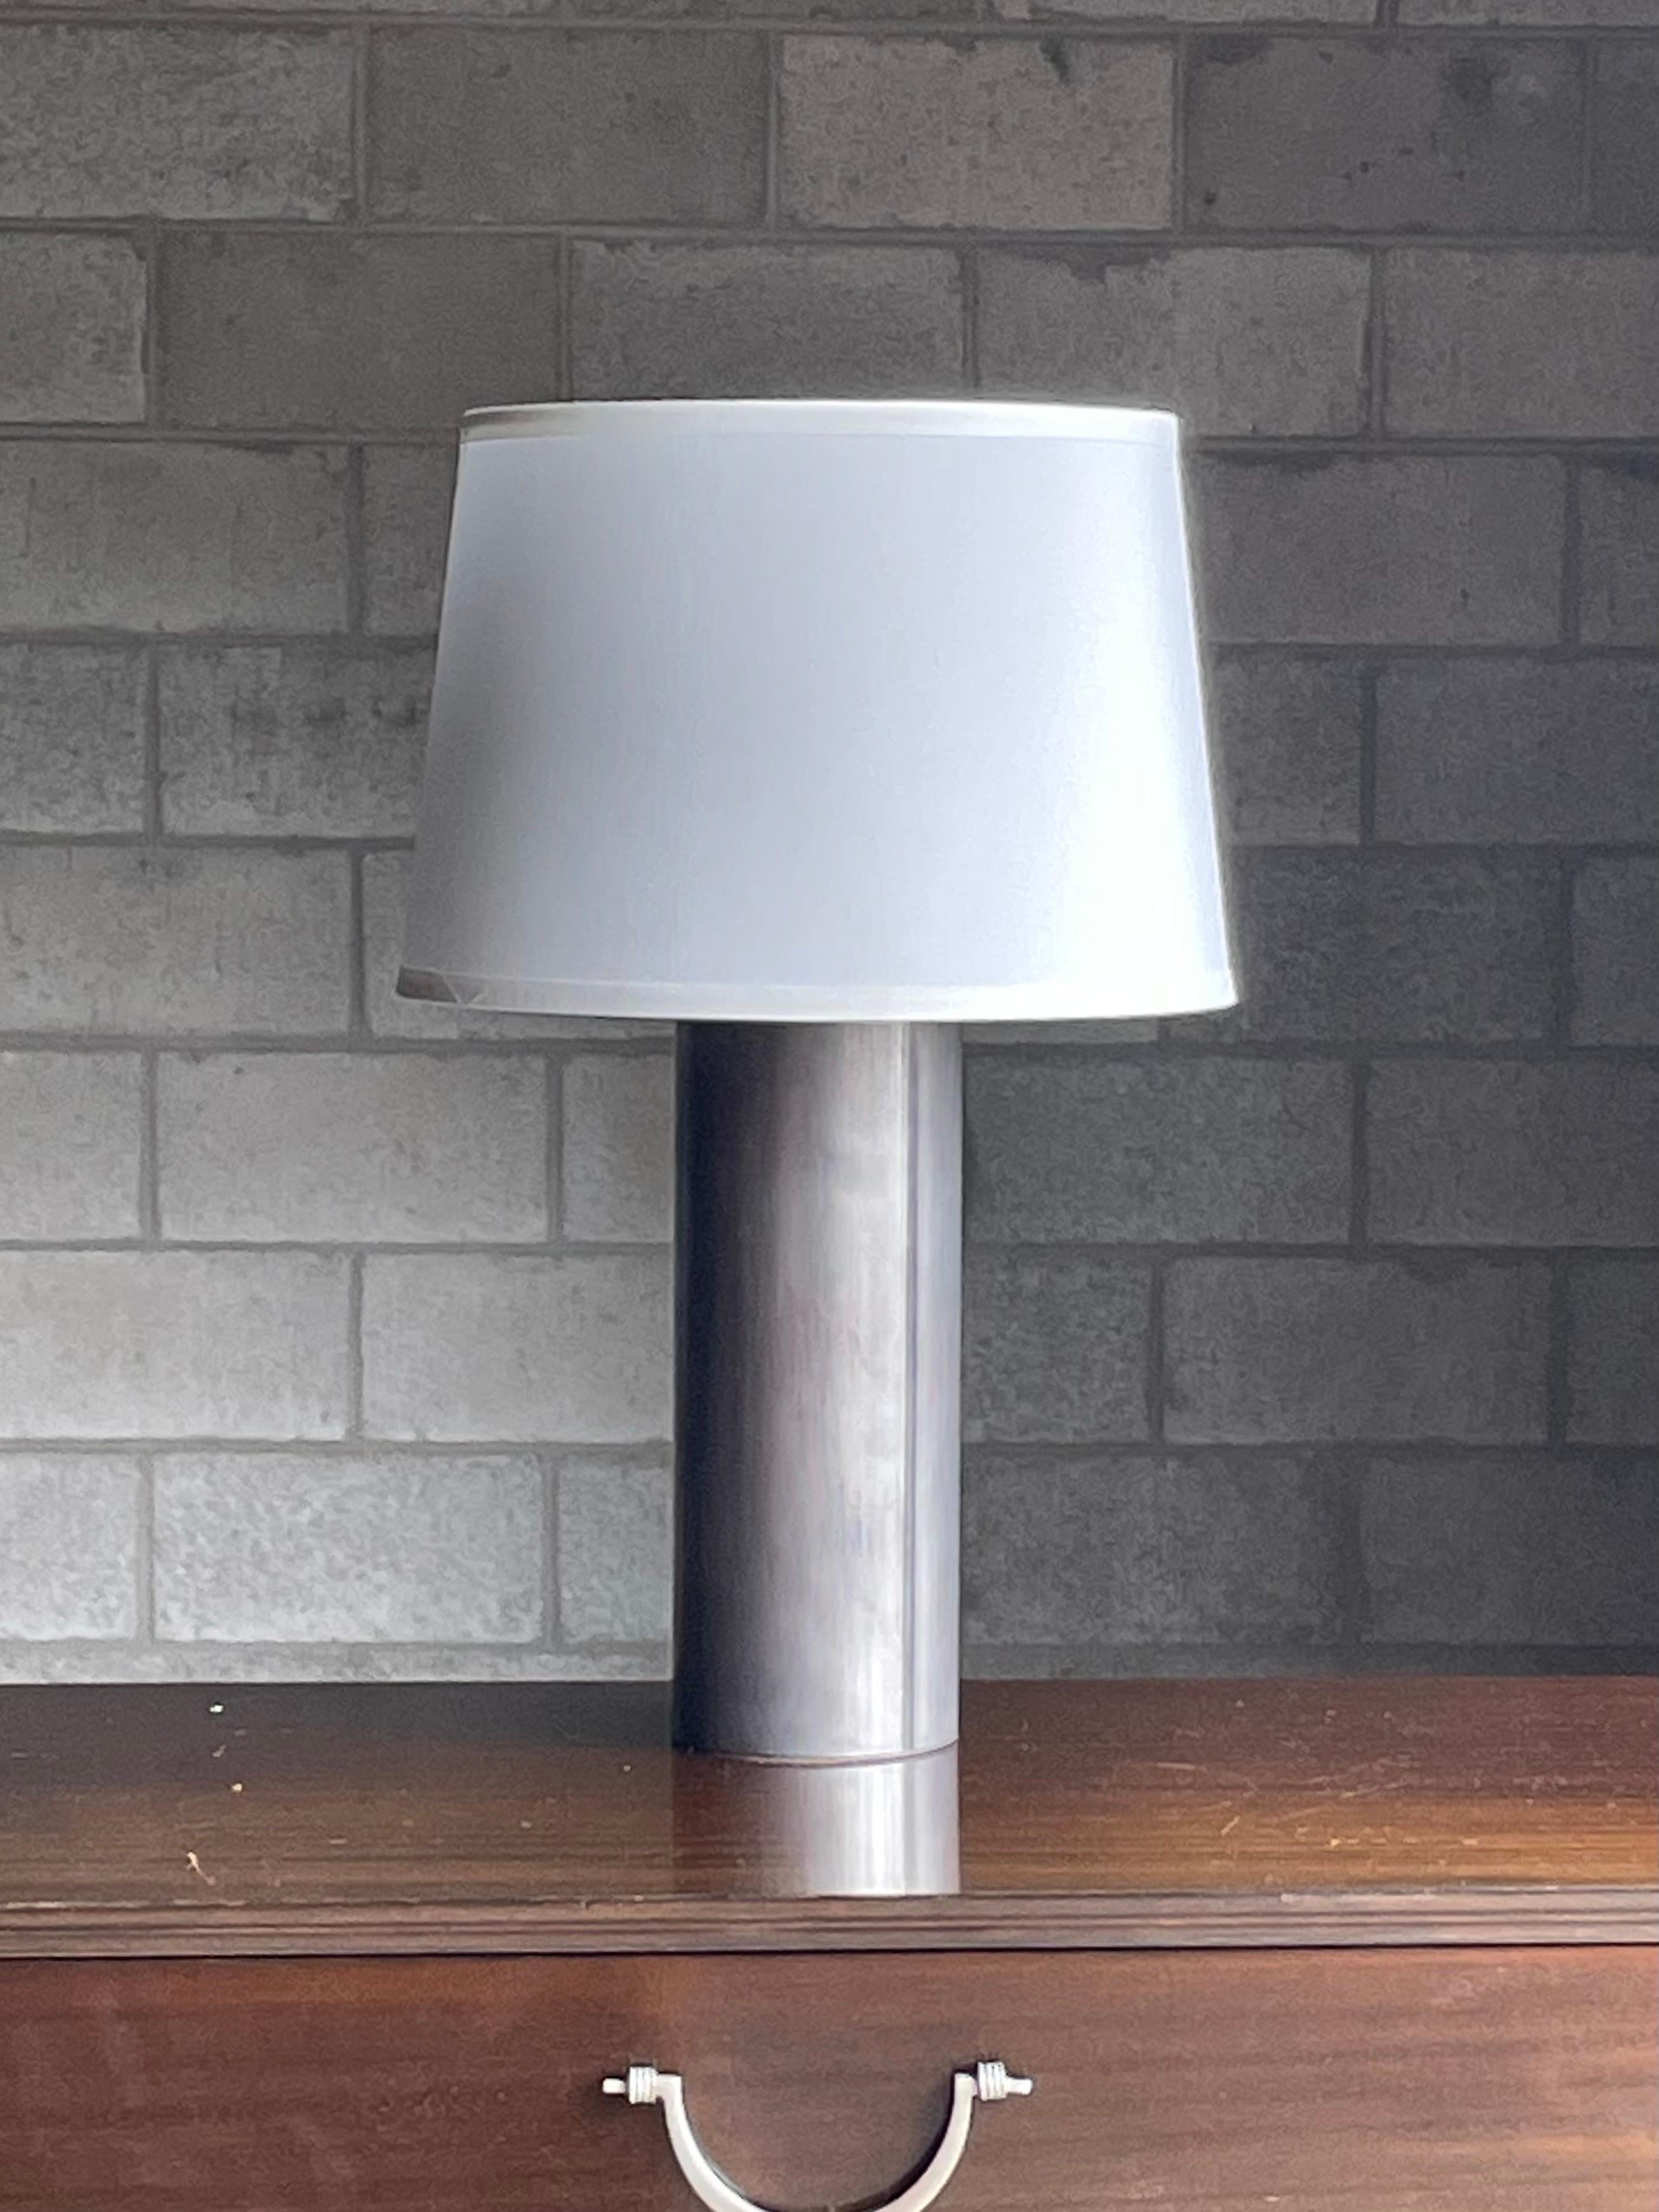 Unusual metal cylinder table lamp in the style of George Kovacs and Robert Sonneman. This appears to be a stainless steel body. Has a wonderful industrial, minimalist, modernist vibe to it which would work in a variety of interiors. 

Measures: